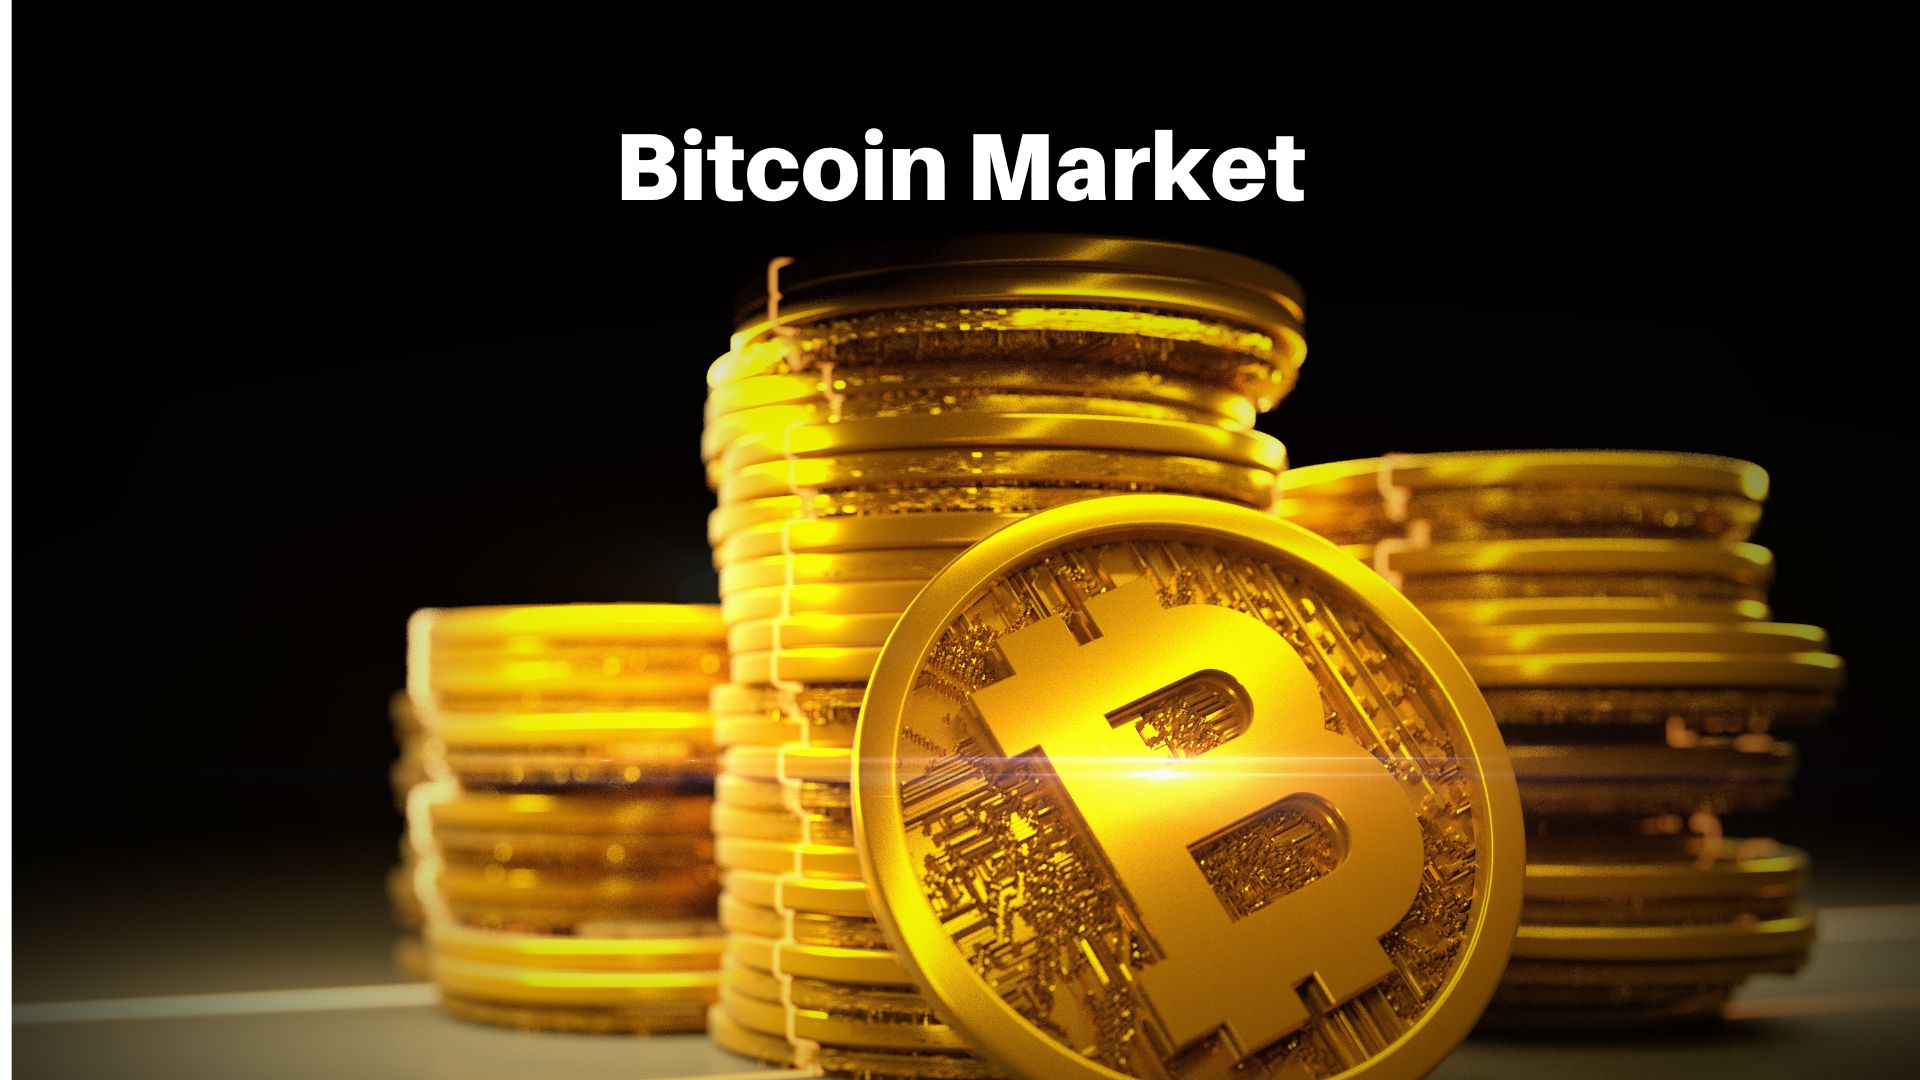 Bitcoin Market Sales to Top USD 285.6 Billion in Revenues by 2033 at a CAGR of 26.2% | Data By Market.us